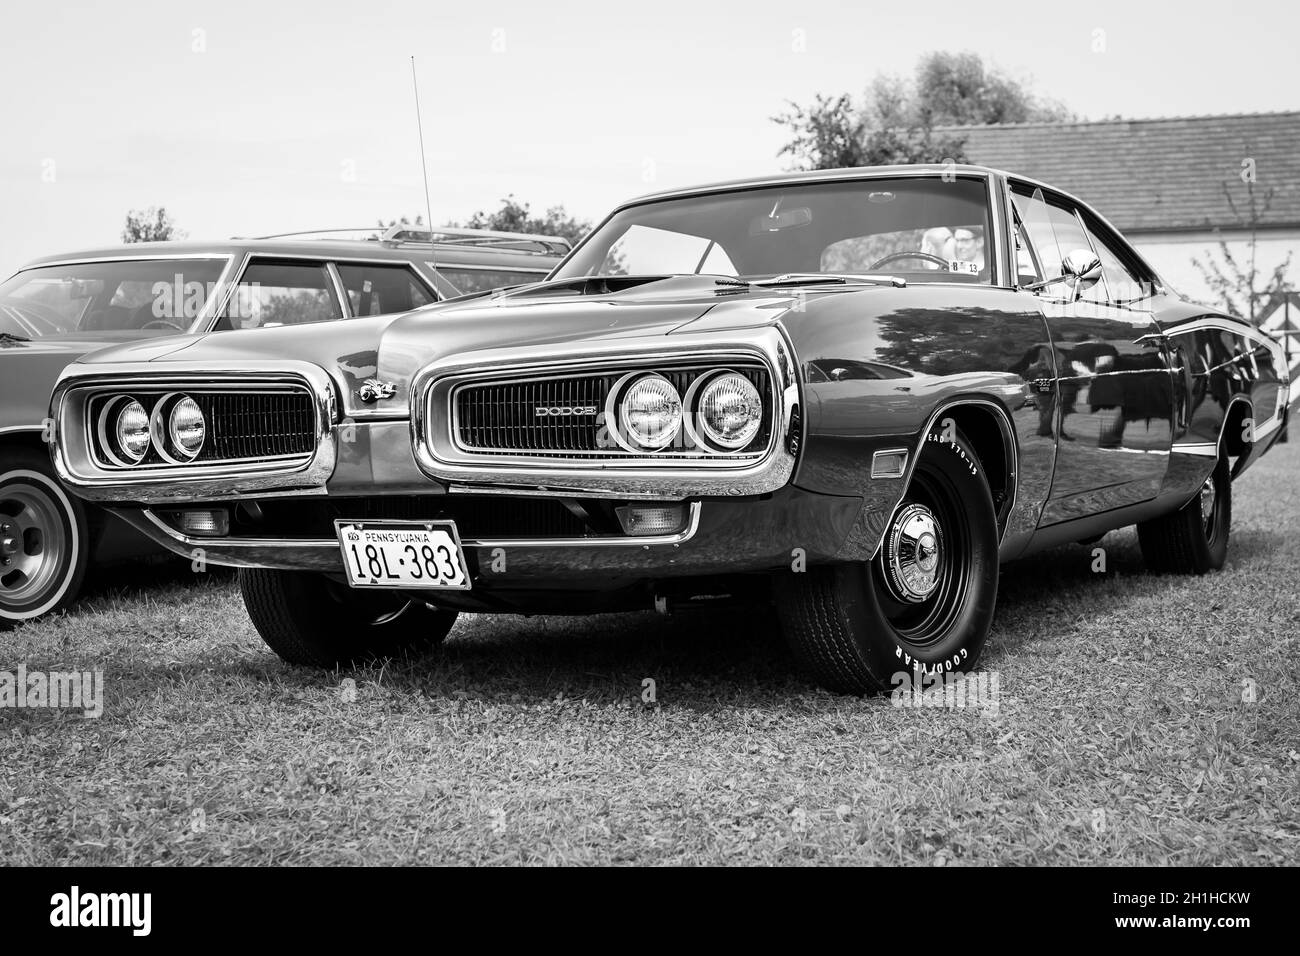 DIEDERSDORF, GERMANY - AUGUST 30, 2020: The muscle car Dodge Super Bee, 1968. Black and white. The exhibition of 'US Car Classics'. Stock Photo